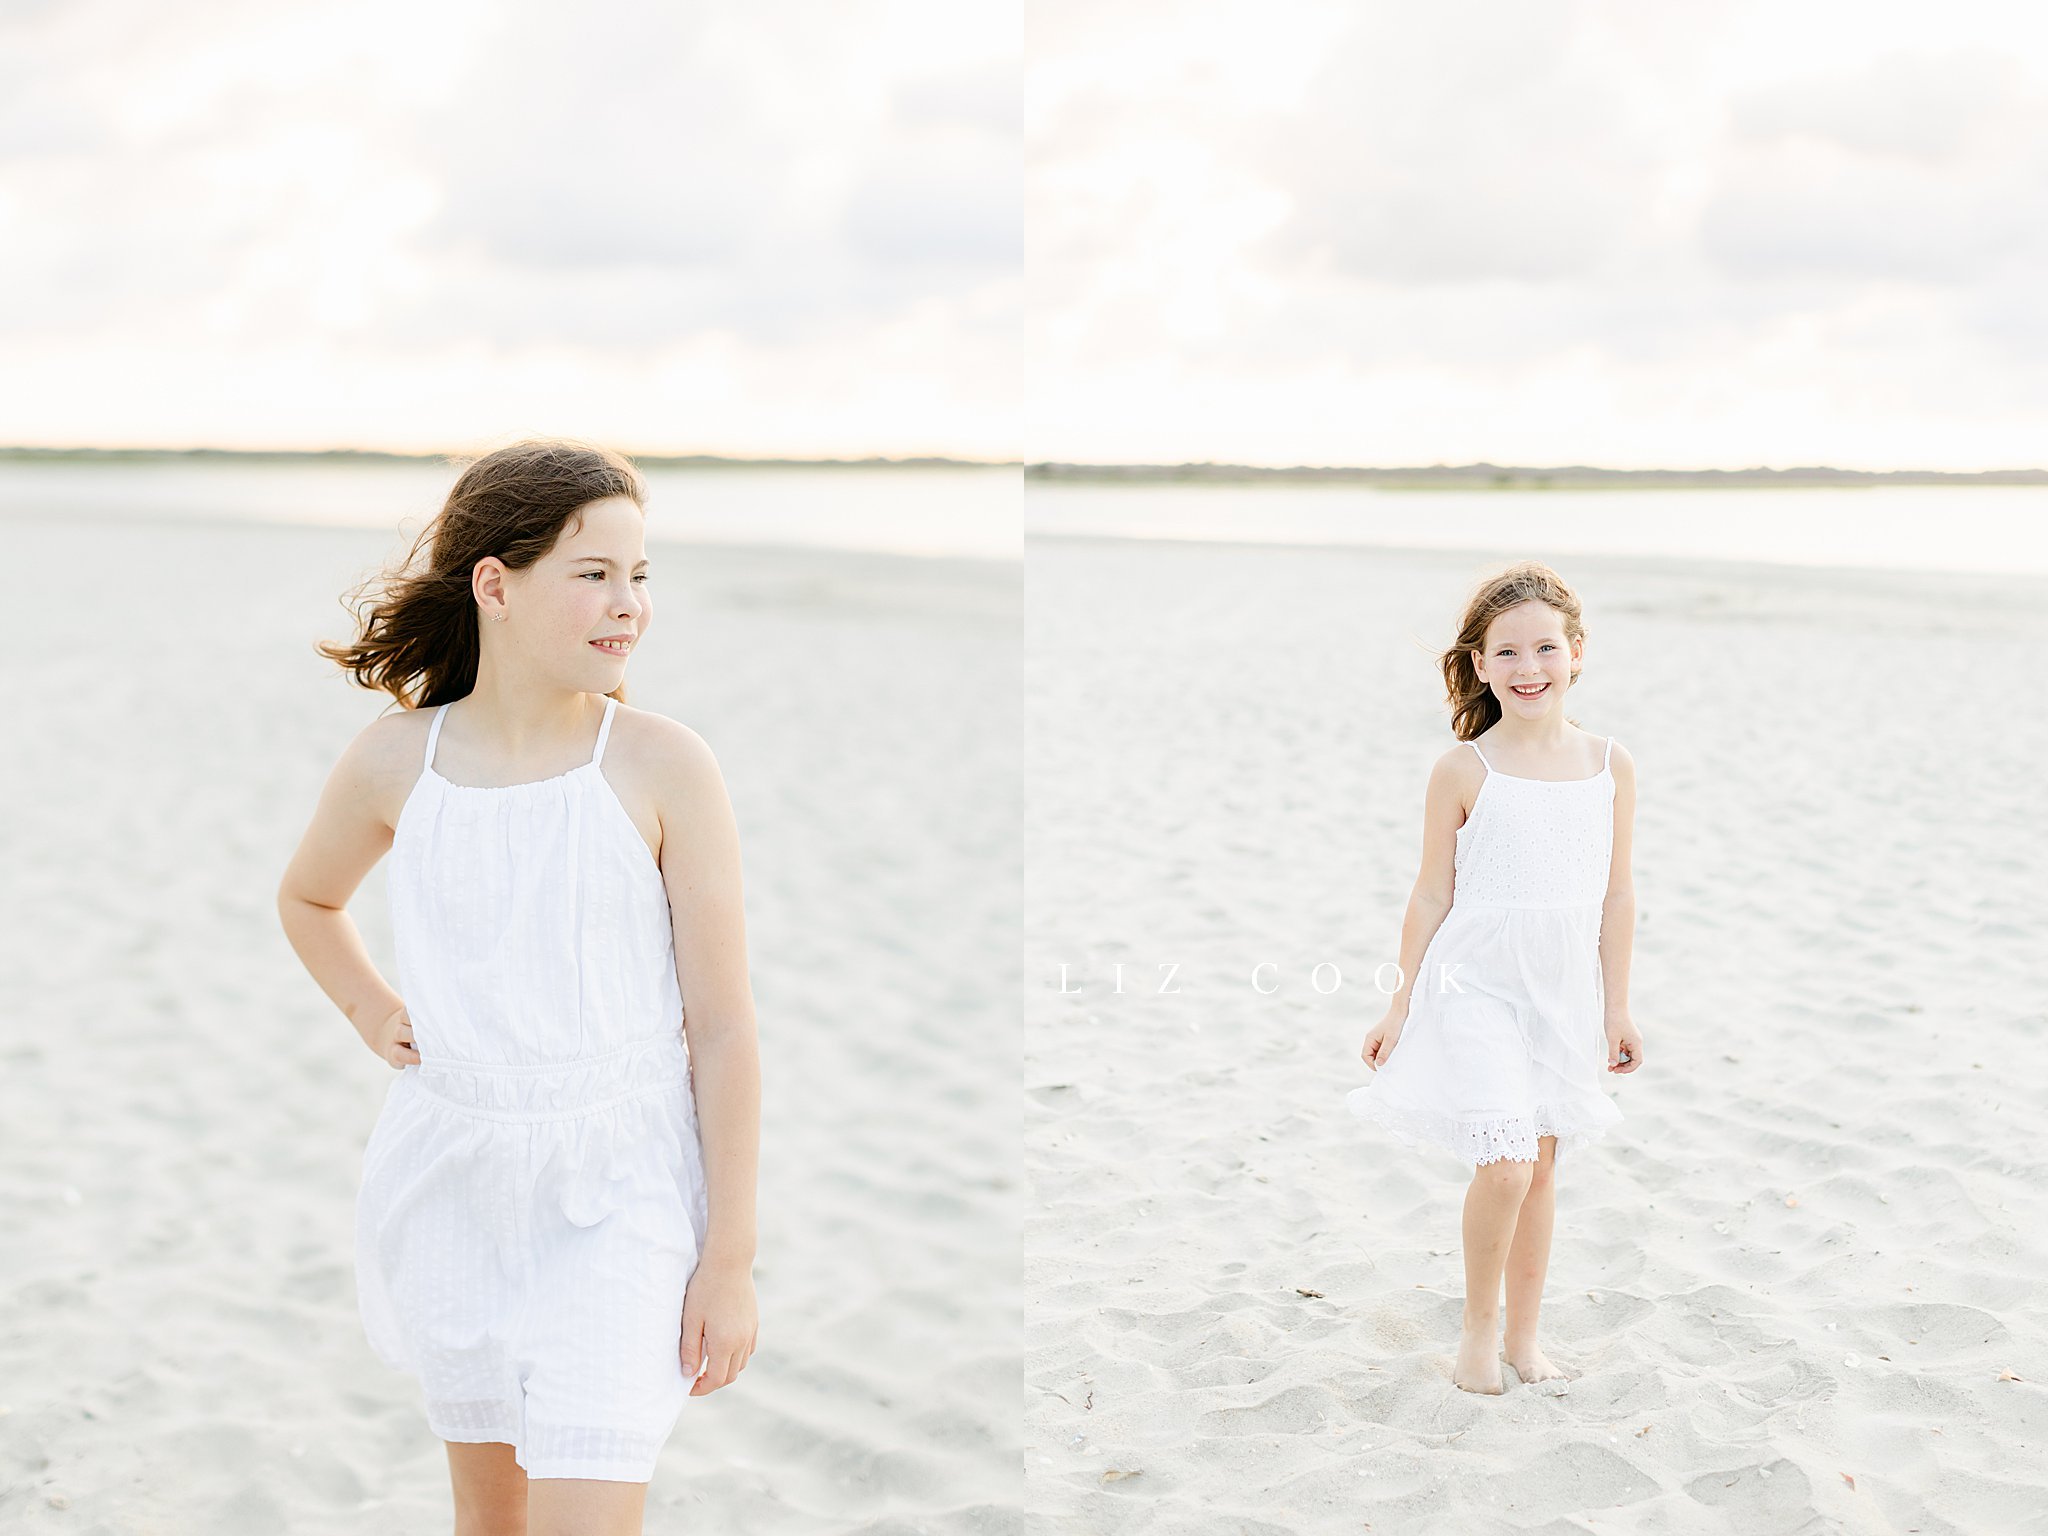 maternity-pictures-on-beach-liz-cook-photography-caroline-jean-photography_0002.jpg